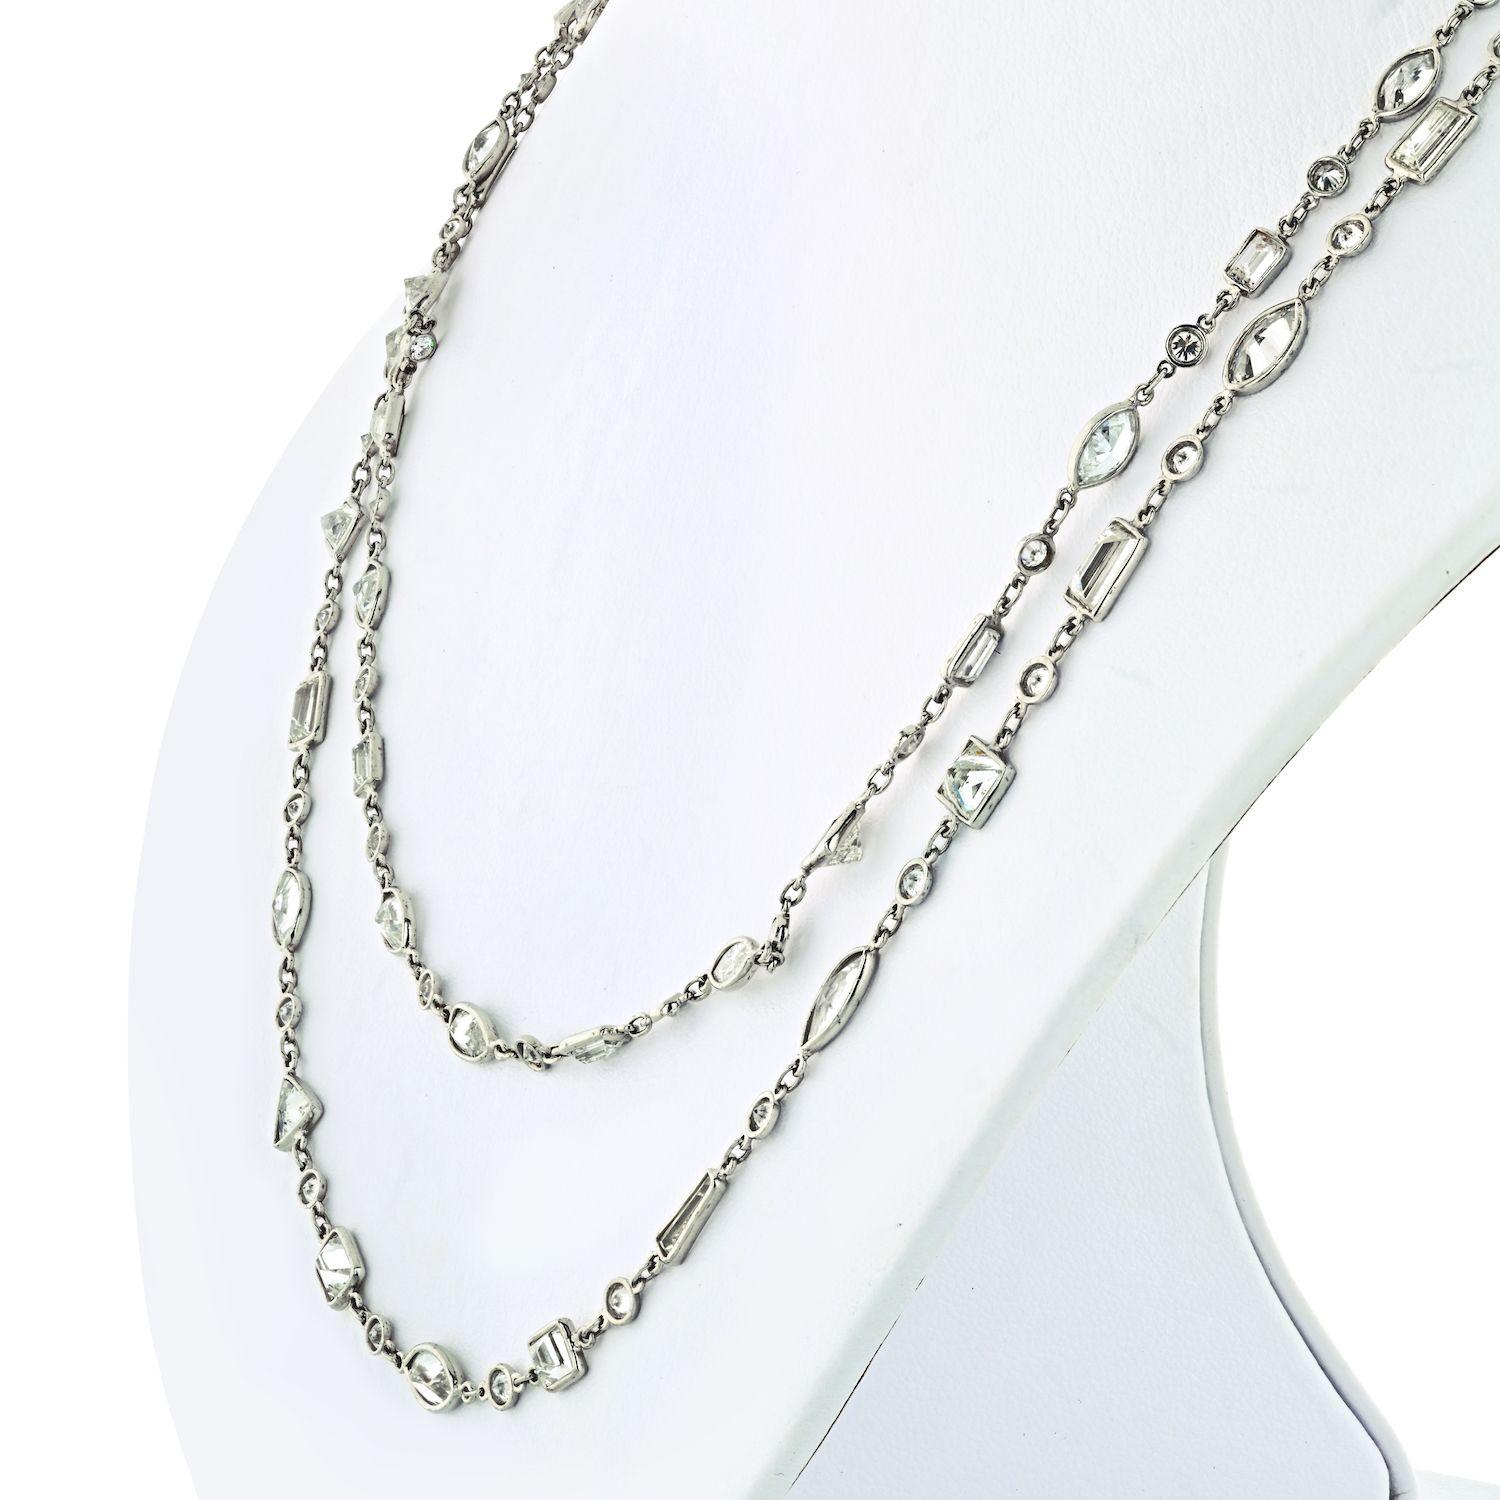 Stunning diamond by the yard chain is something any woman can use in her daily ensemble: over a white T or over a blouse, wearing little black dress, or just when in a flirty sweater diamond by the yard is your perfect accessory.

Best of all it is